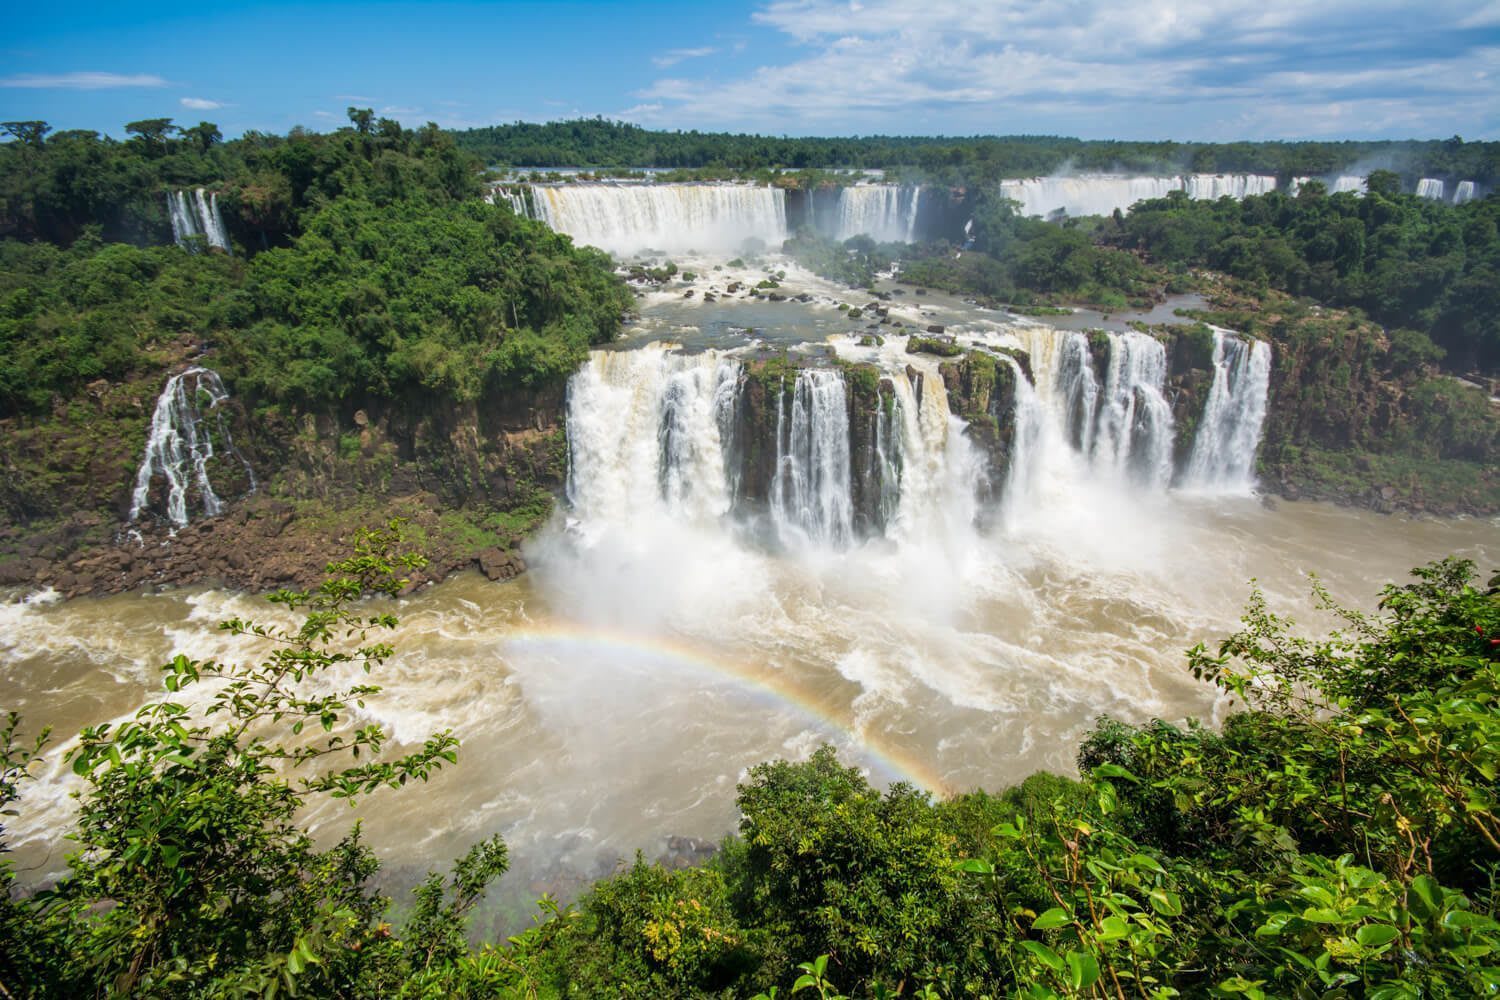 Iguazu Falls: Getting The Best Views From Both Sides